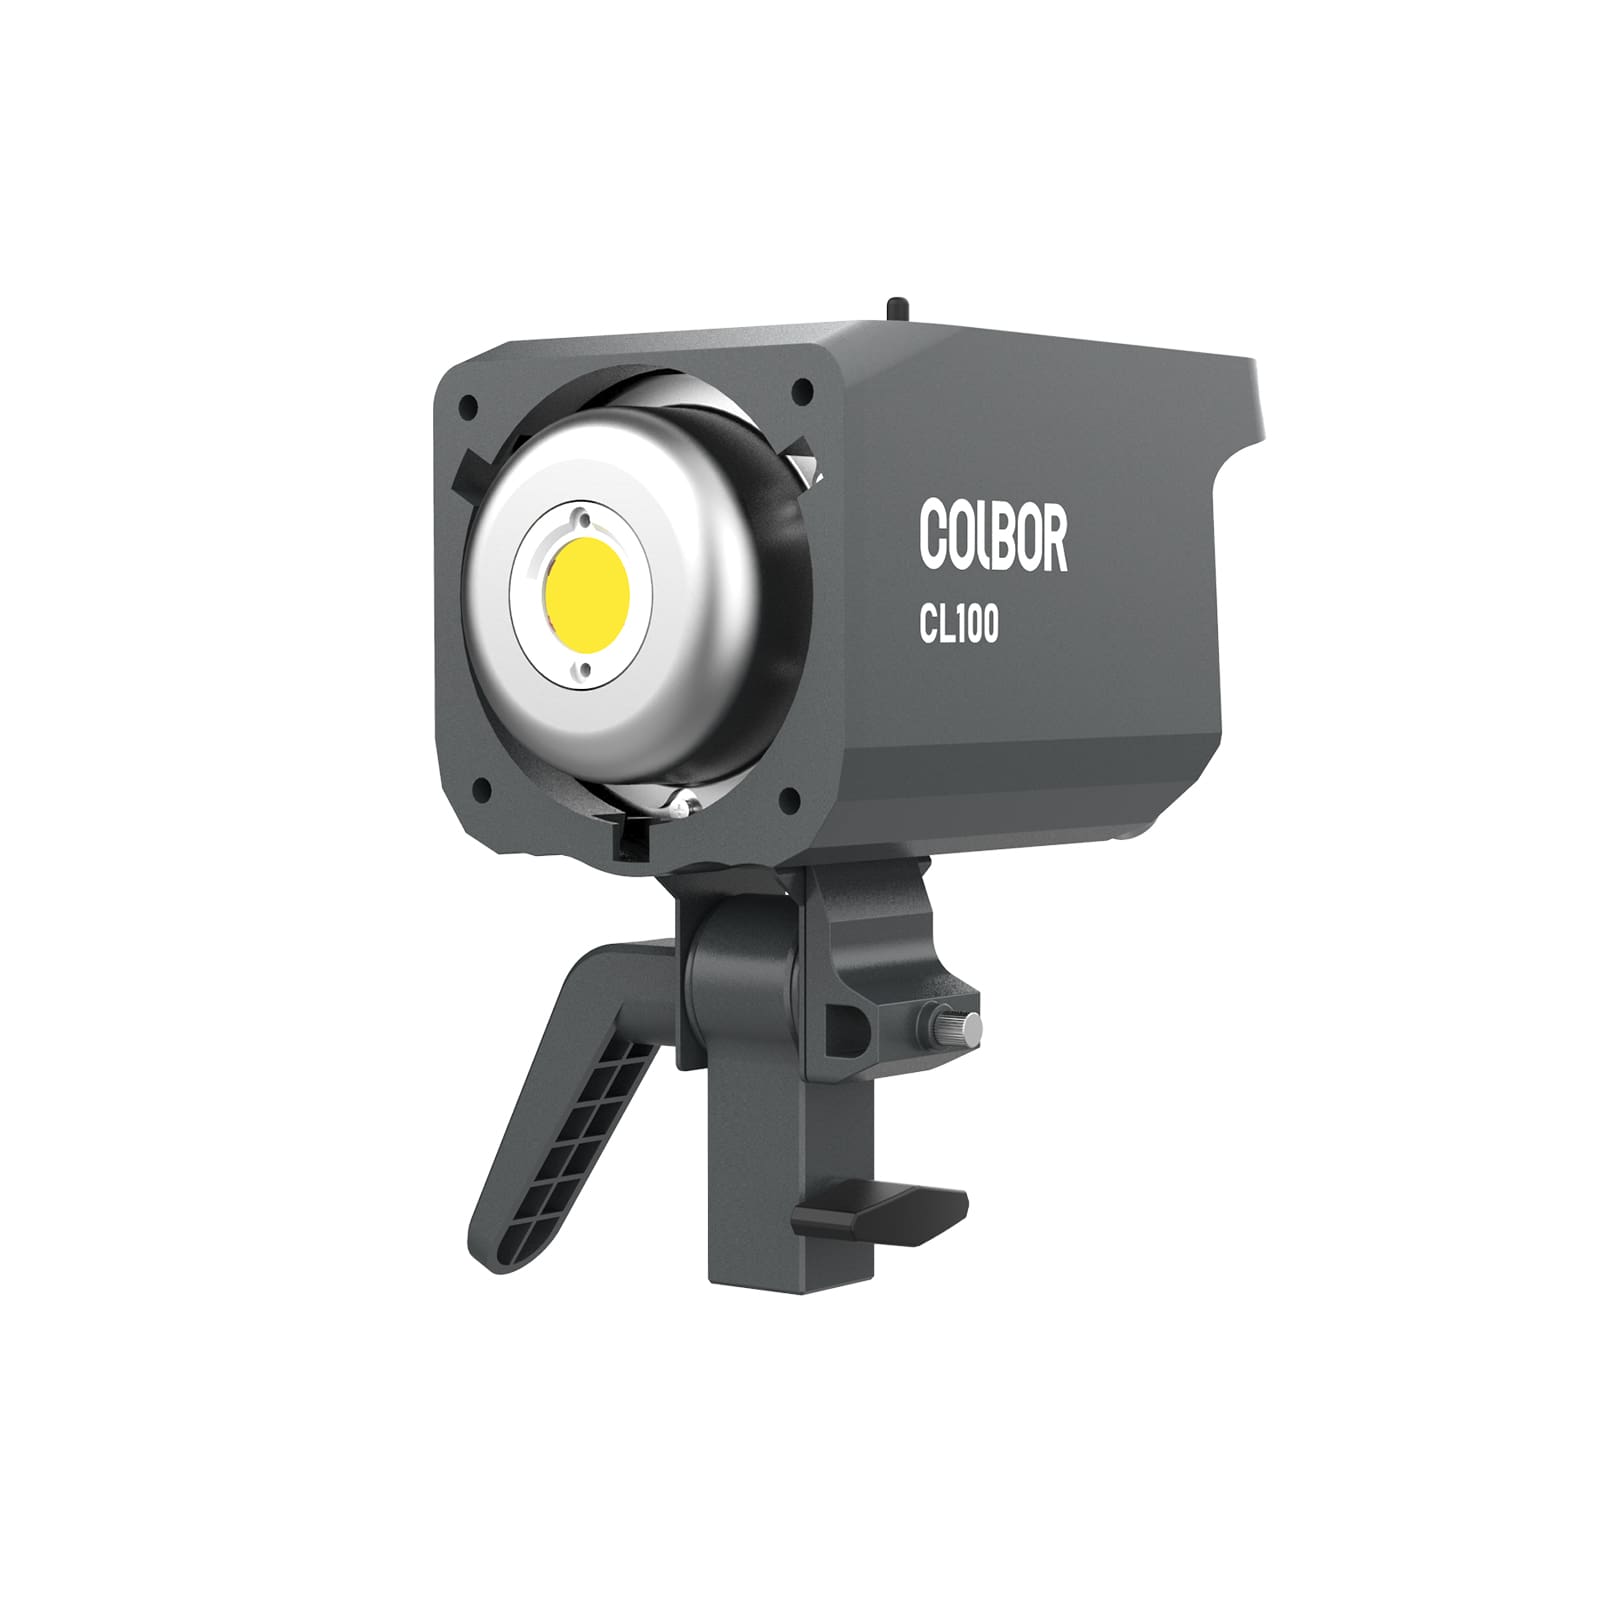 Recording studio lighting COLBOR CL100 with a CRI of 97+ LED beads and 50 lighting effects, is powerful for mobile shooting